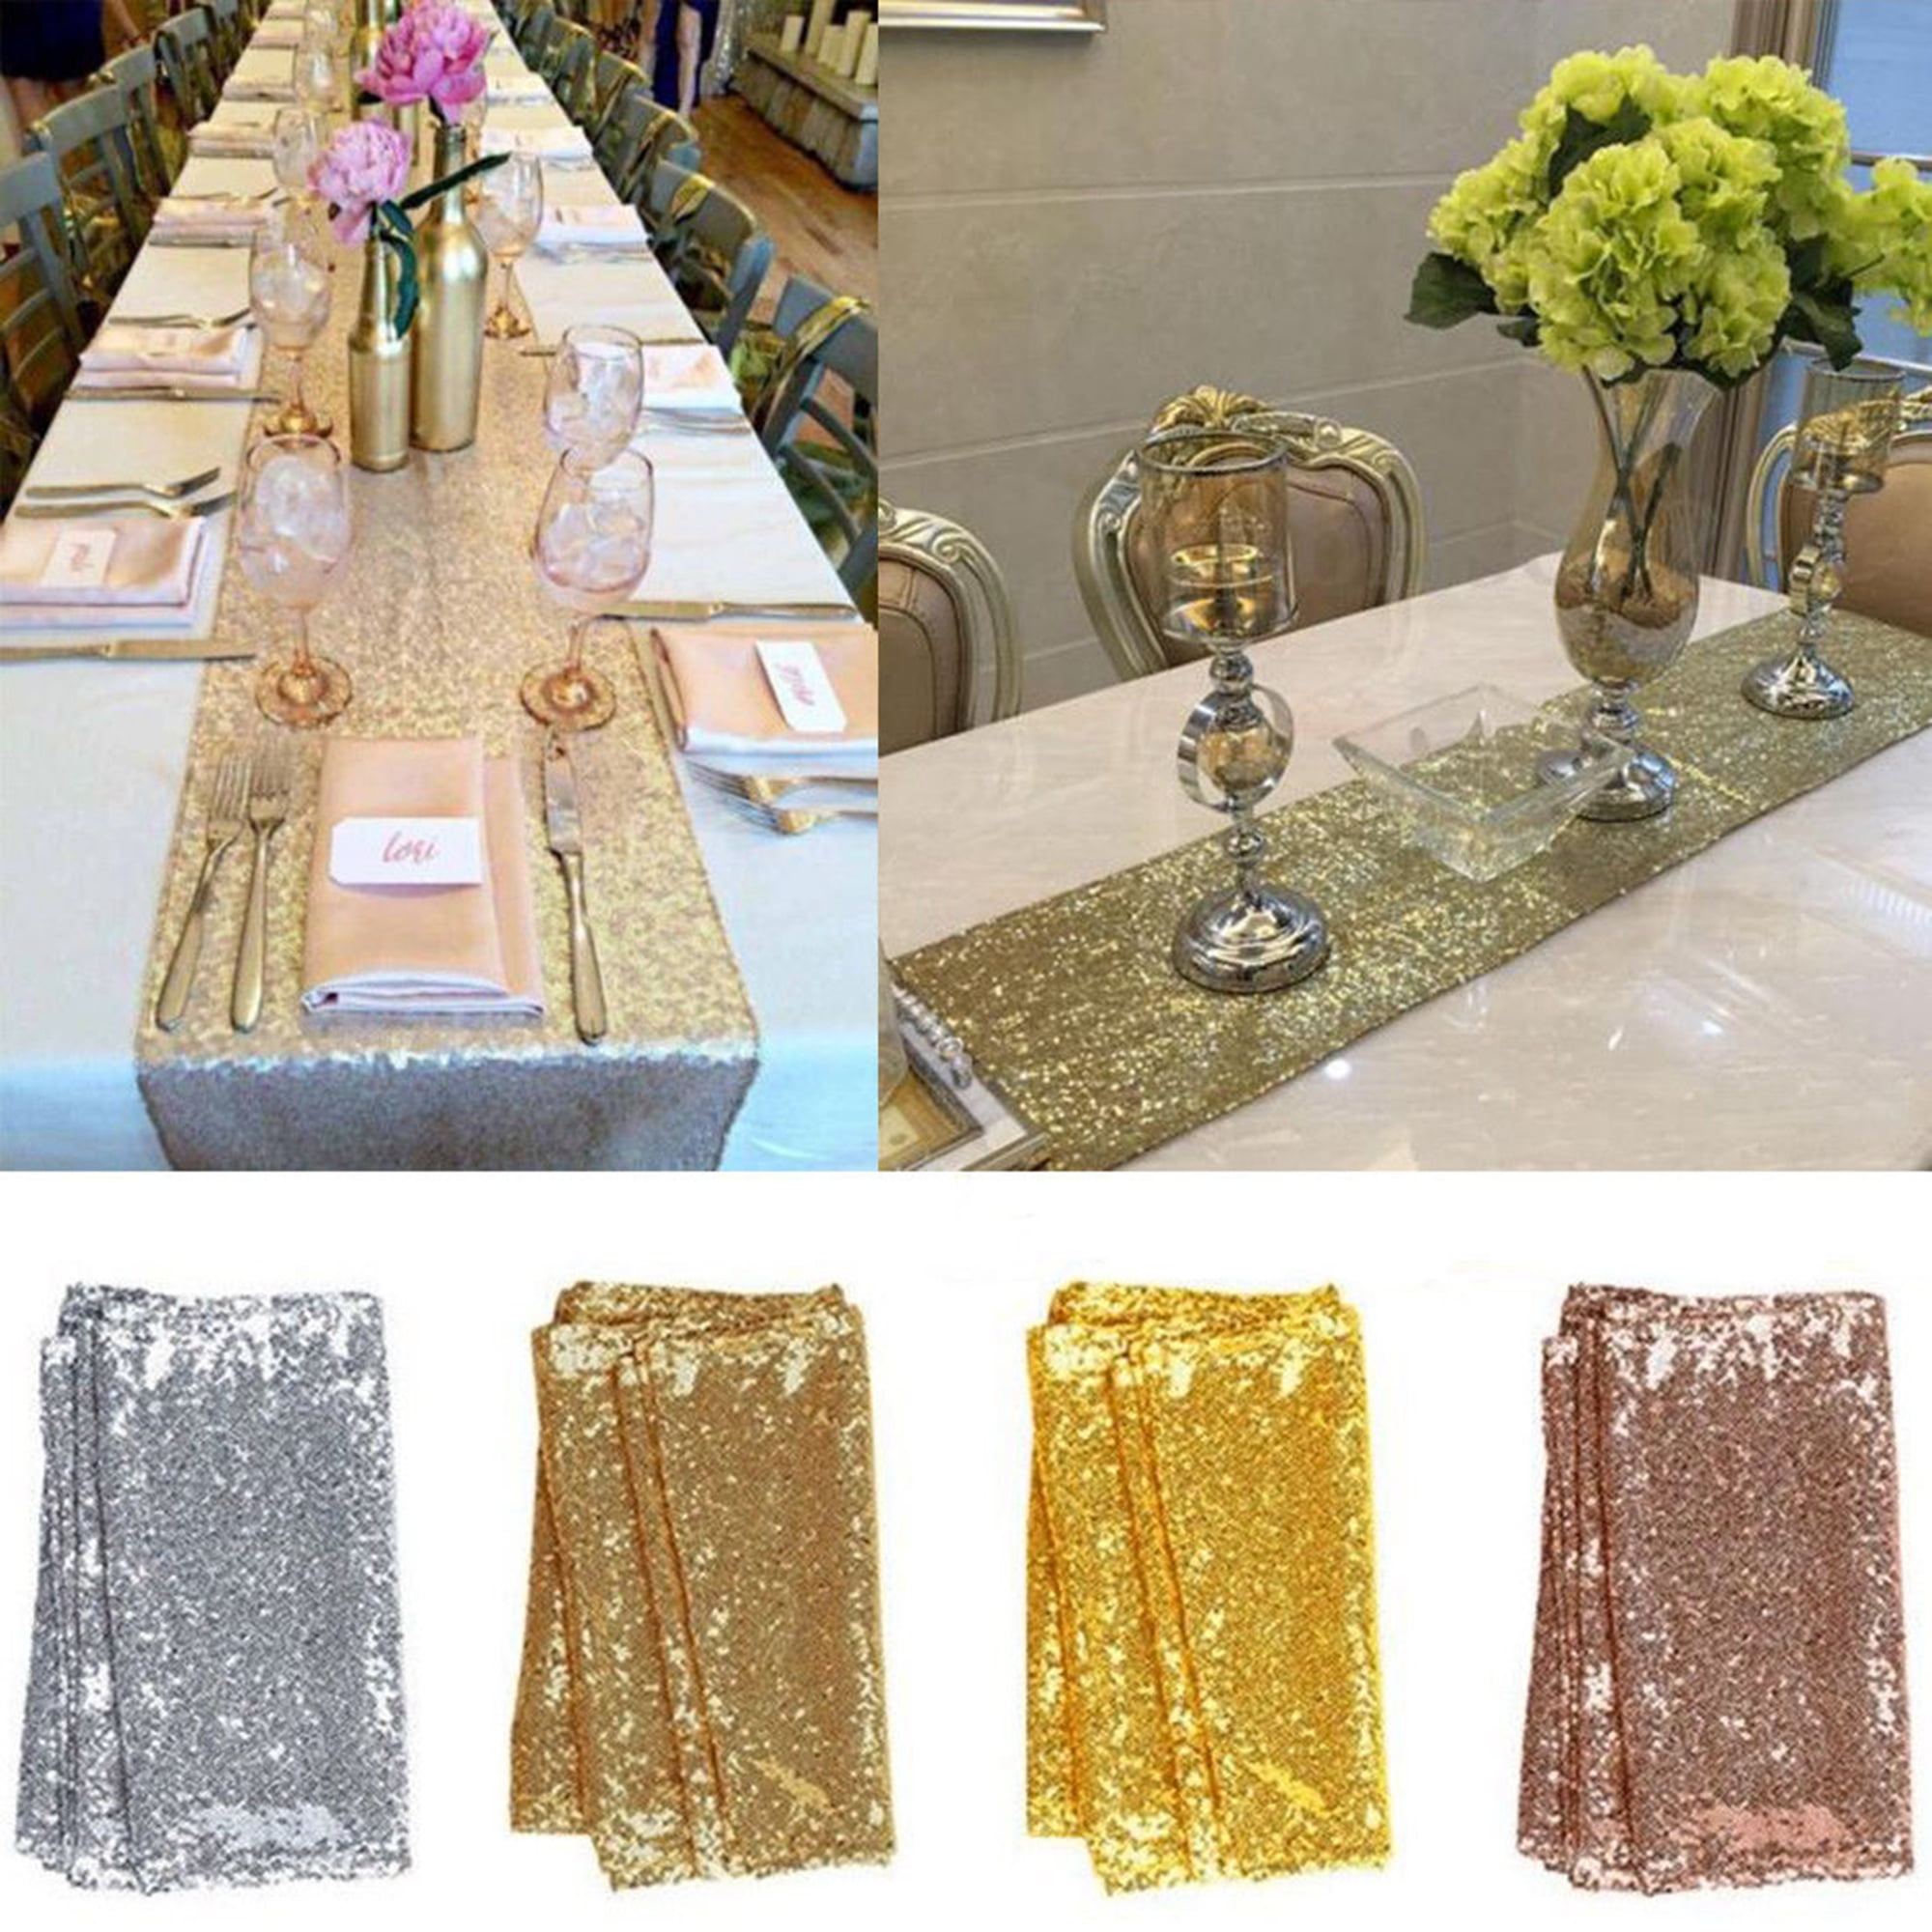 JYFLZQ Gold Sequin Table Runner 12x108 Pack of 10 Glitter Sequin Fabric Table Linens Runner Sparkly Sequin Runners for Table Wedding Birthday Party Decor 